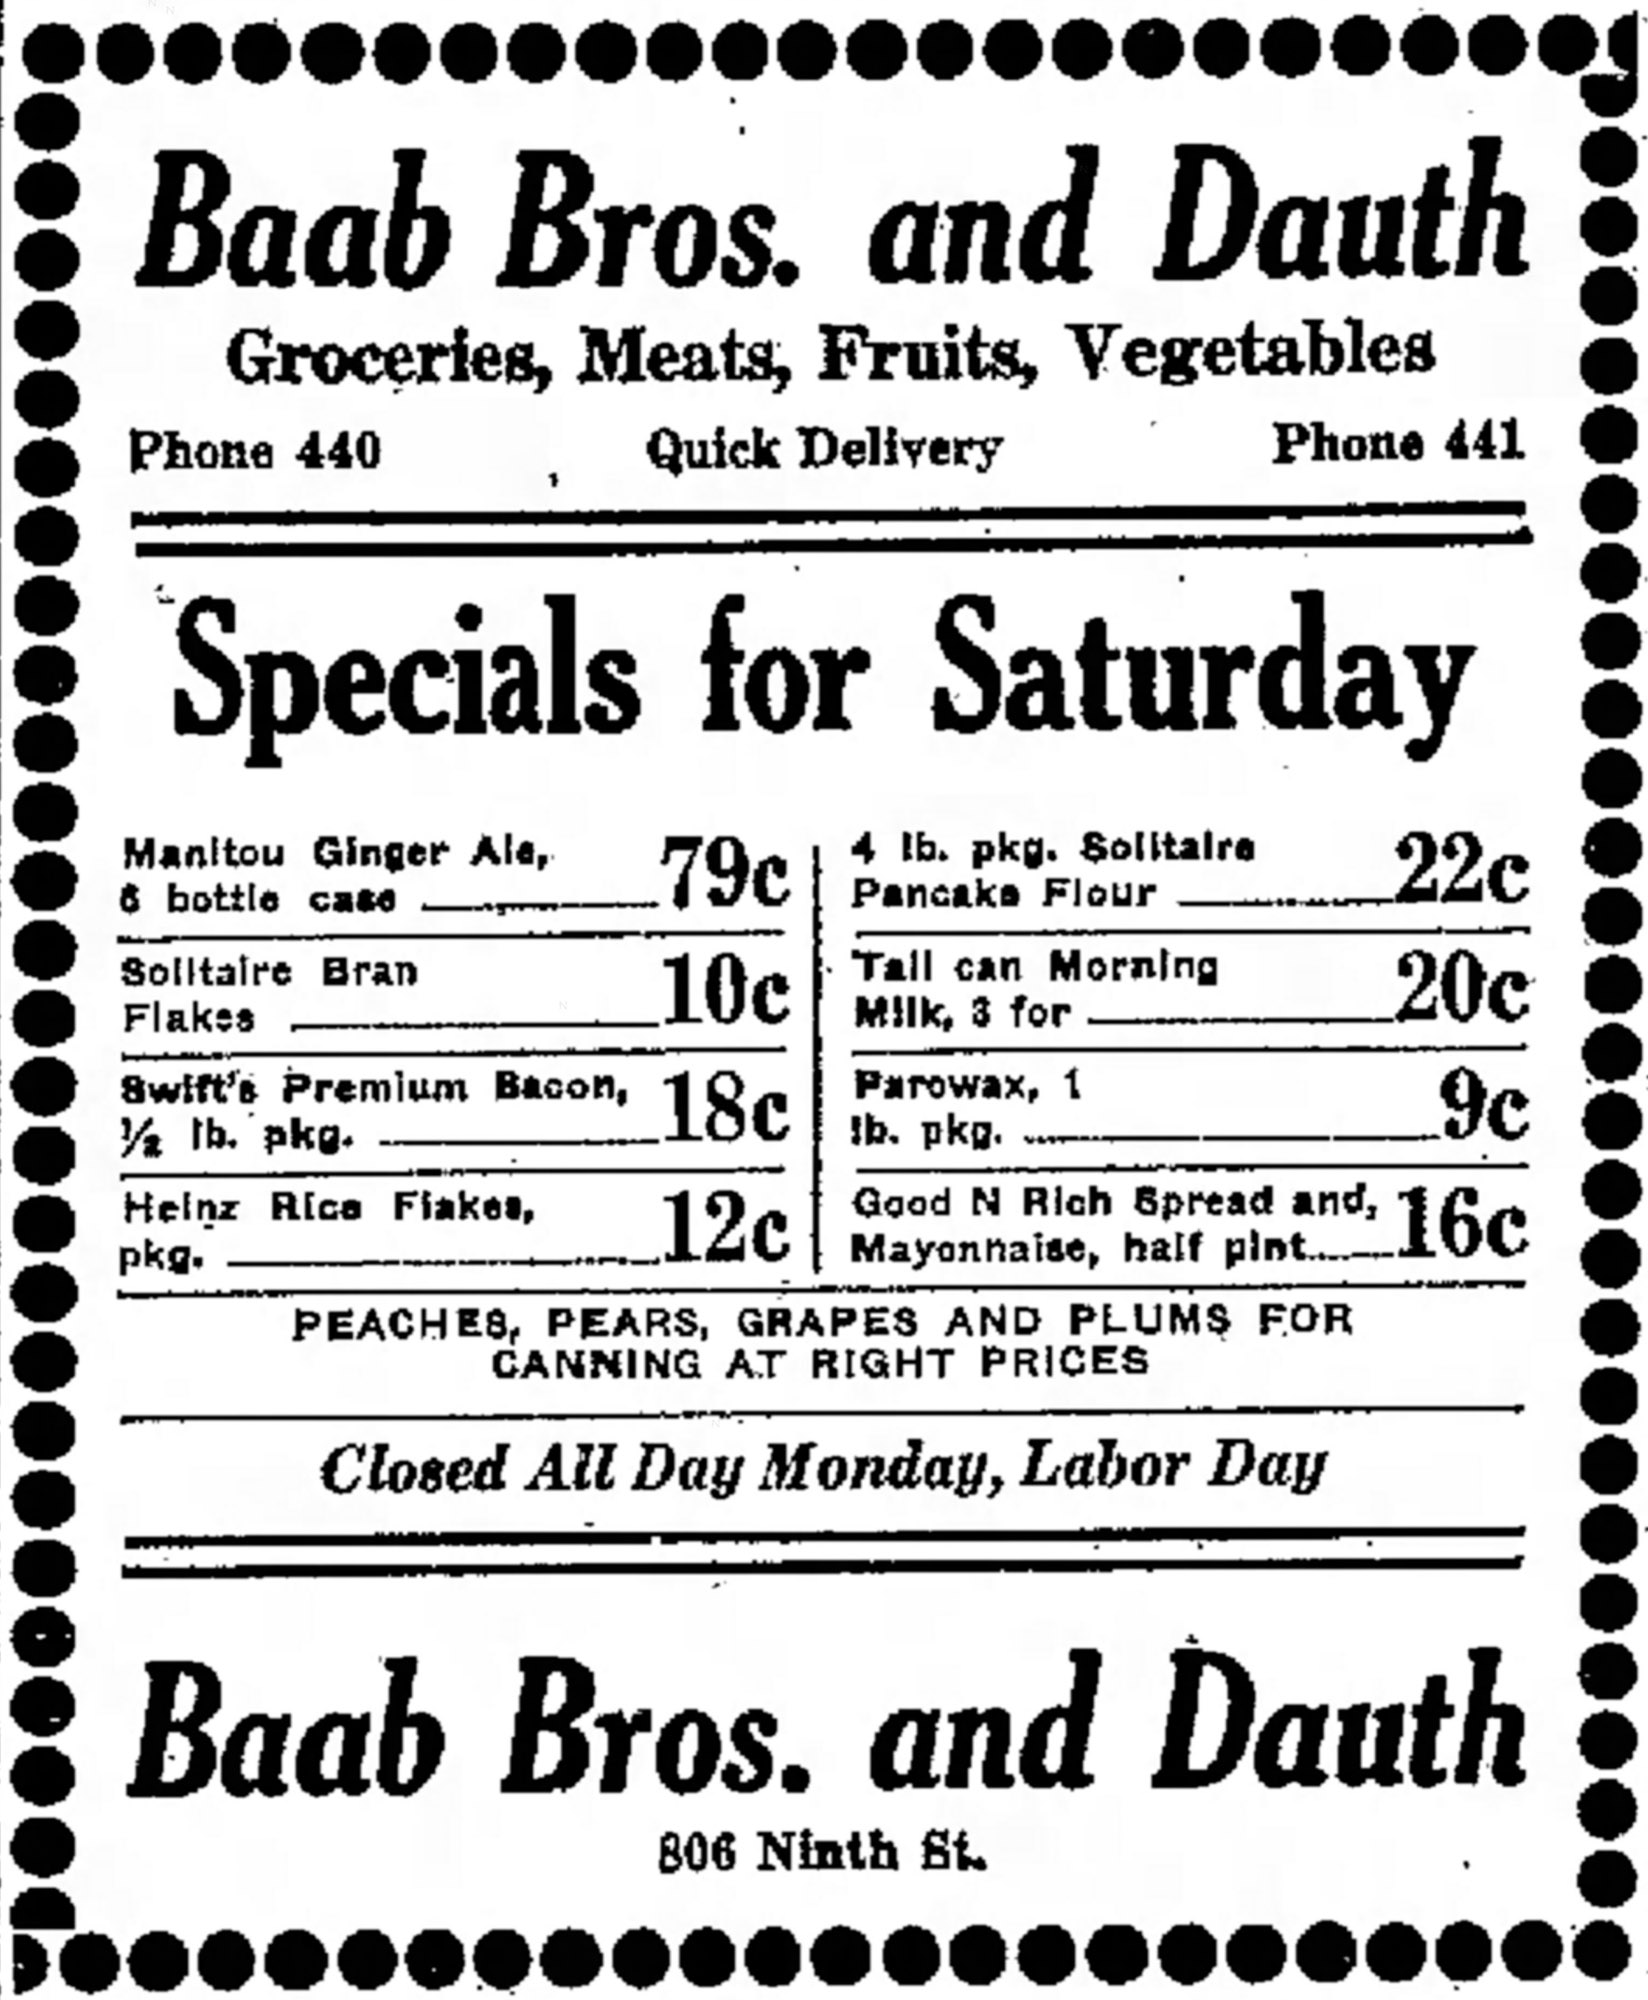 Dauth Family Archive - 1931-09-04 - Greeley Daily Tribune - Baab Bros and Dauth Advertisement